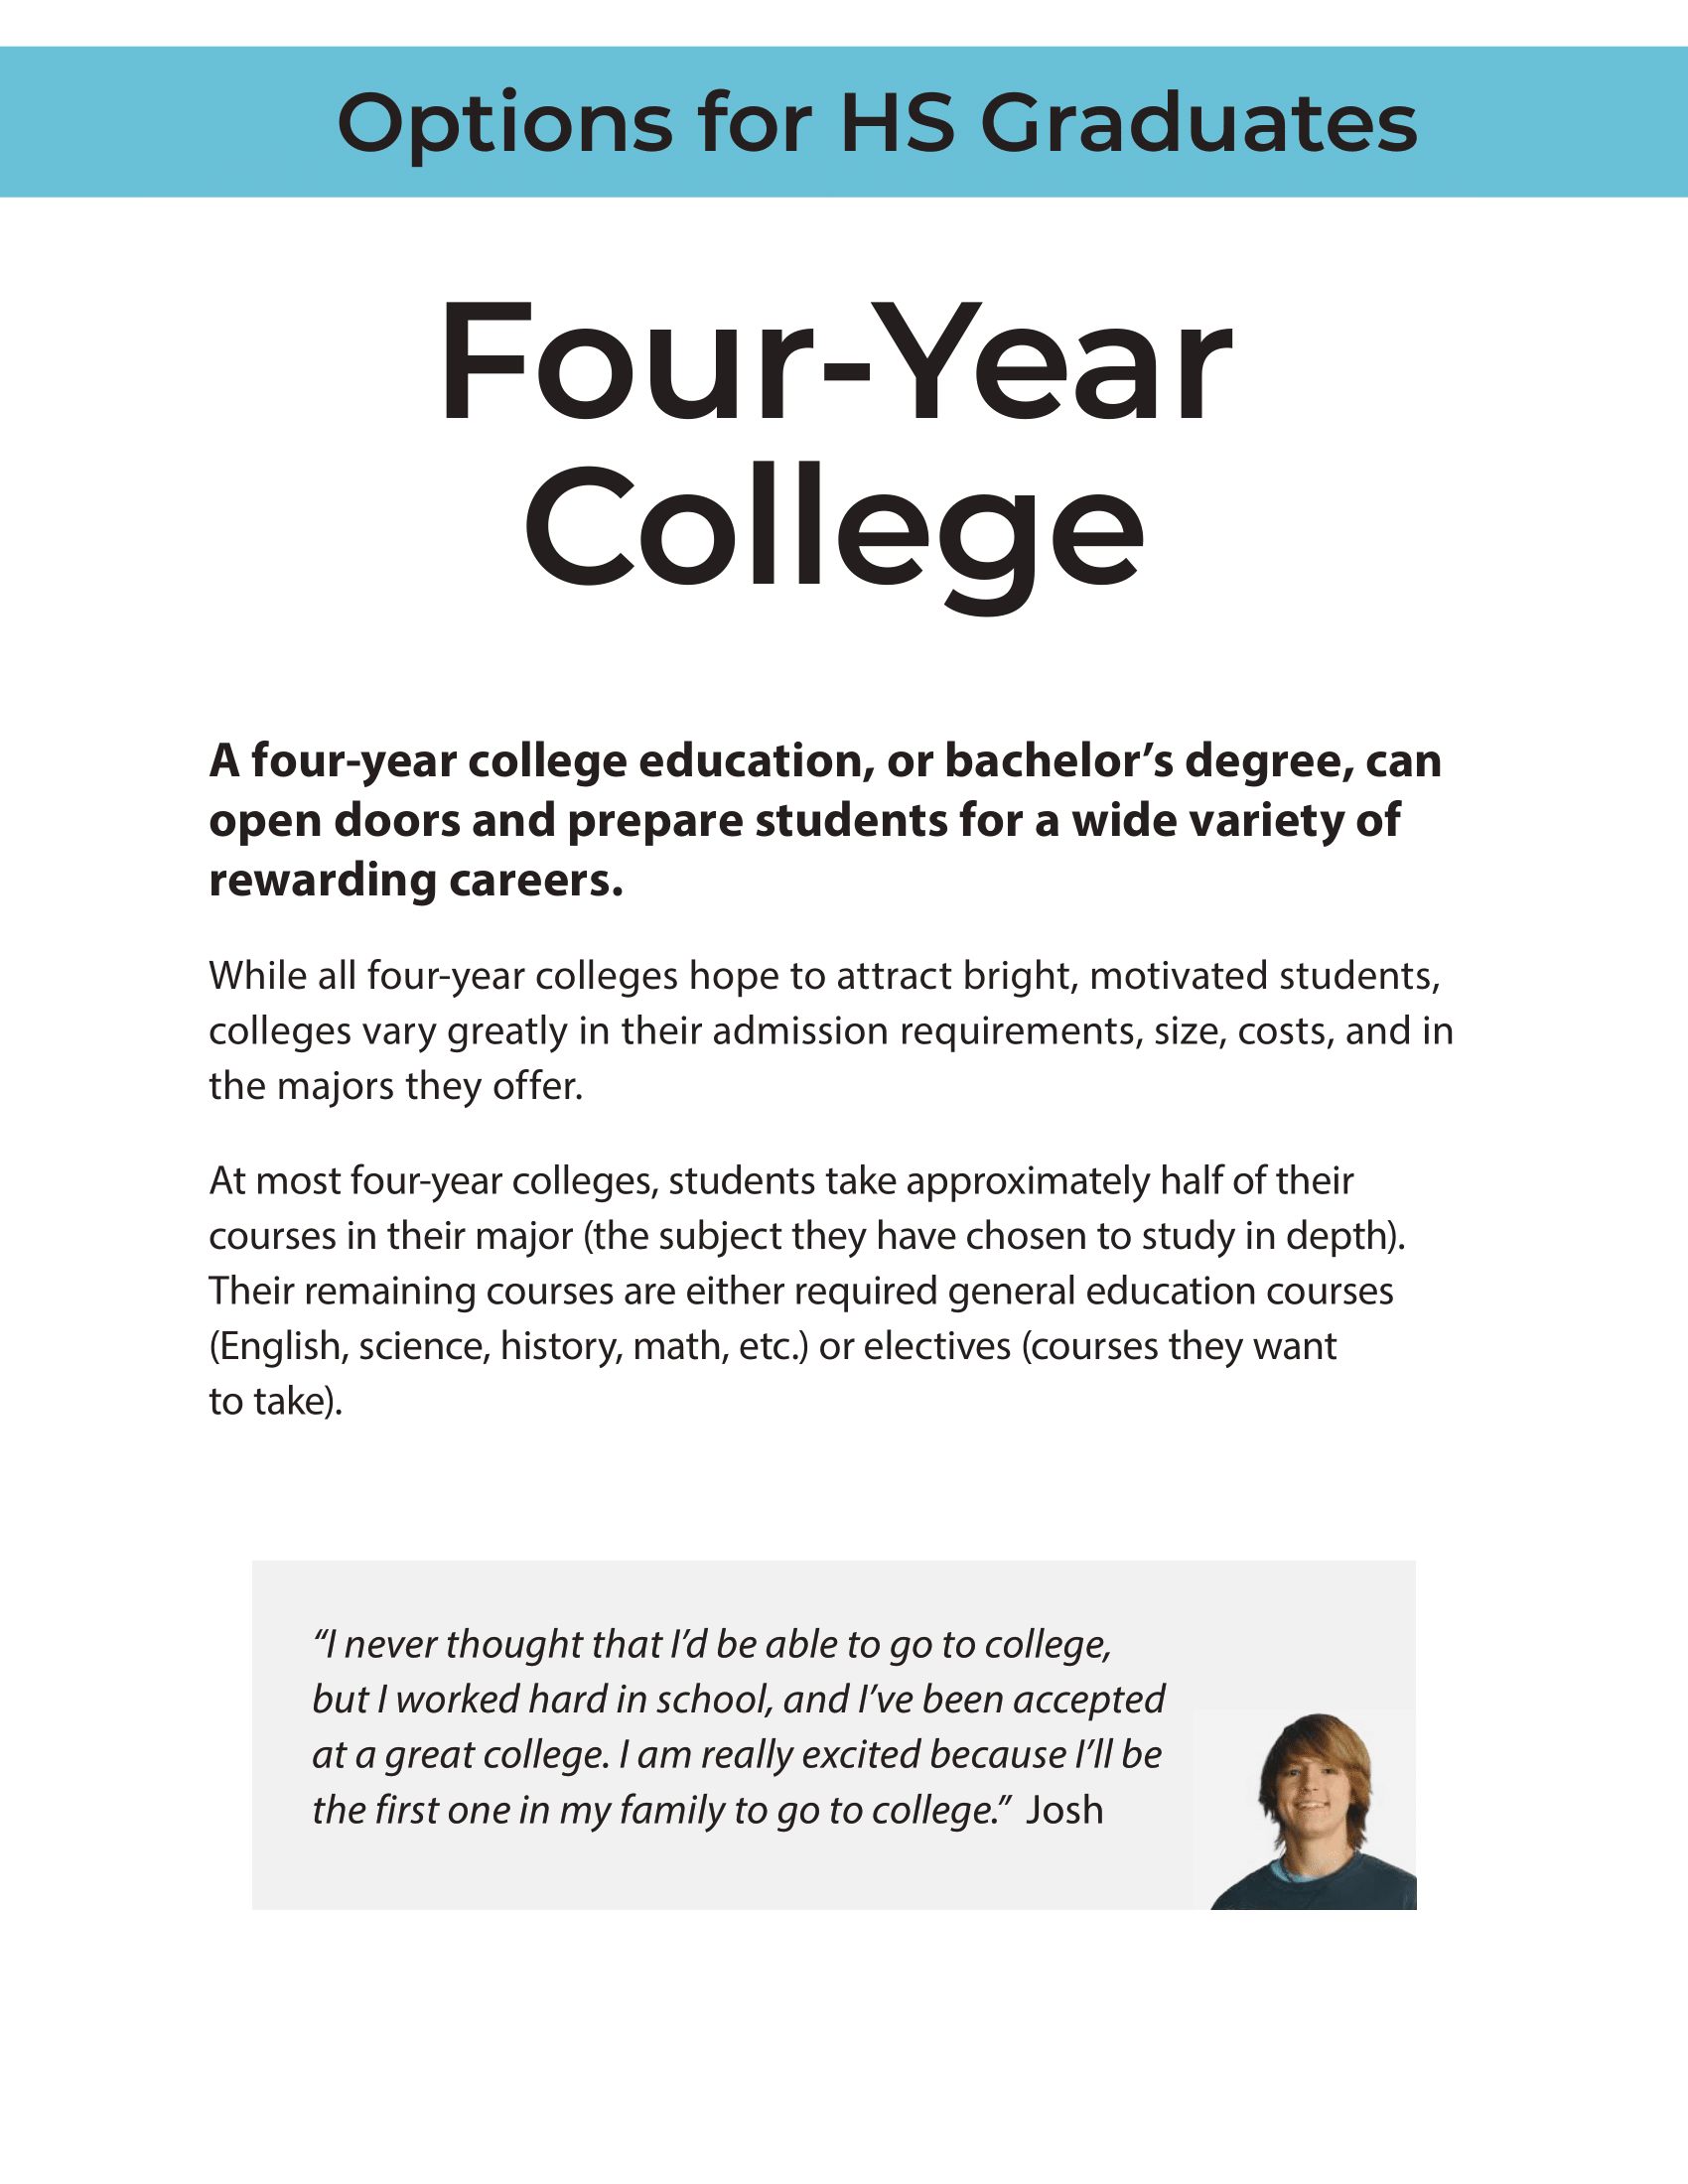 Options for HS Graduates - Four-Year College